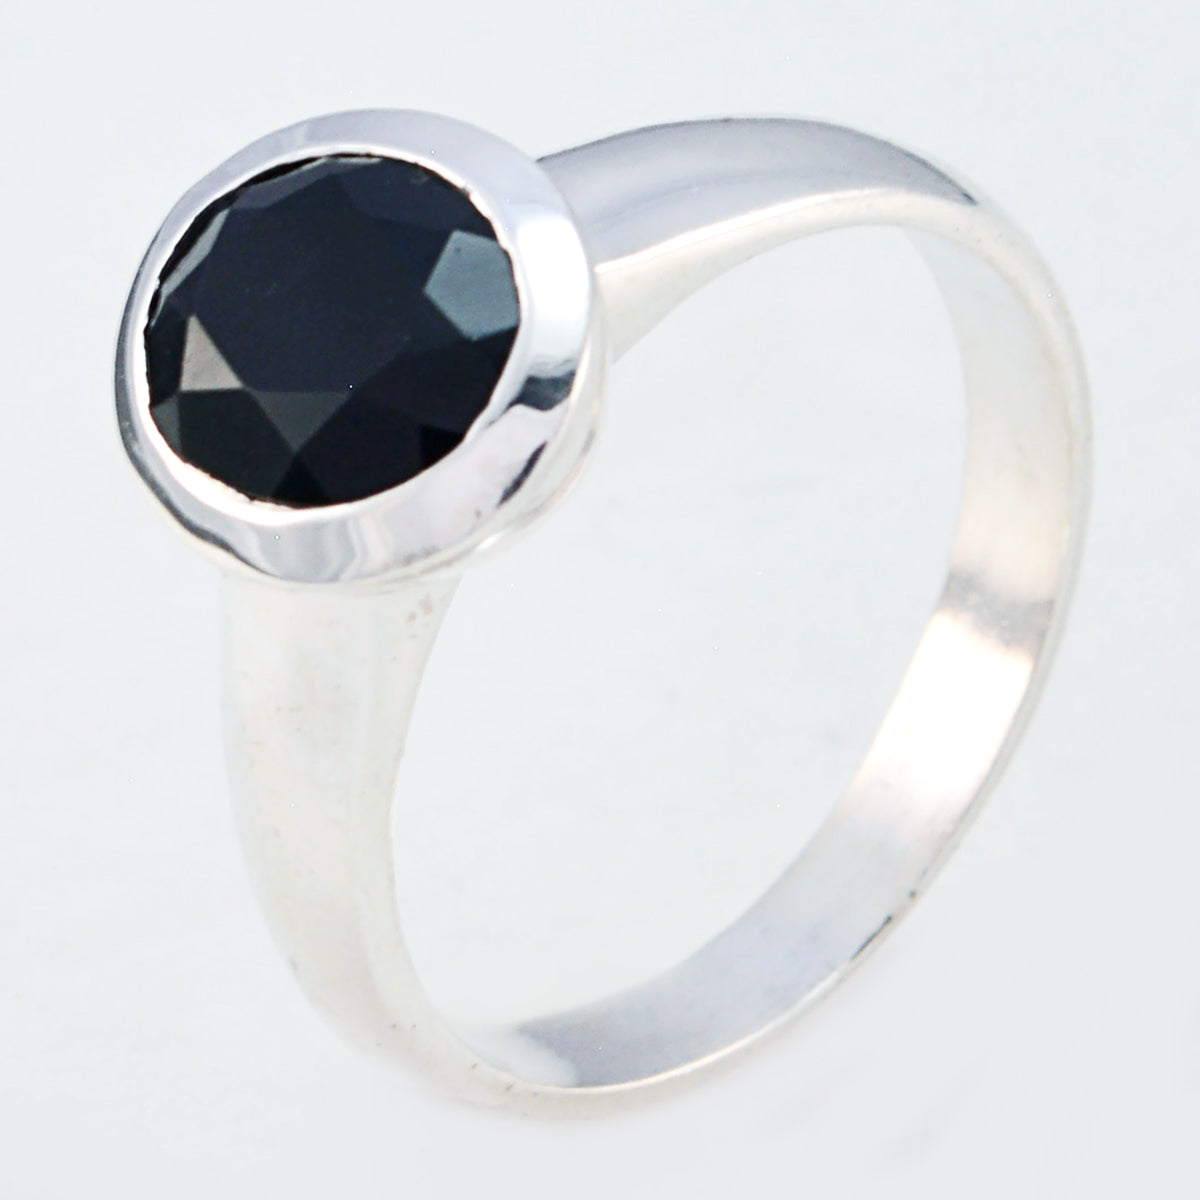 Riyo Fair Stone Black Onyx Solid Silver Rings His And Her Jewelry